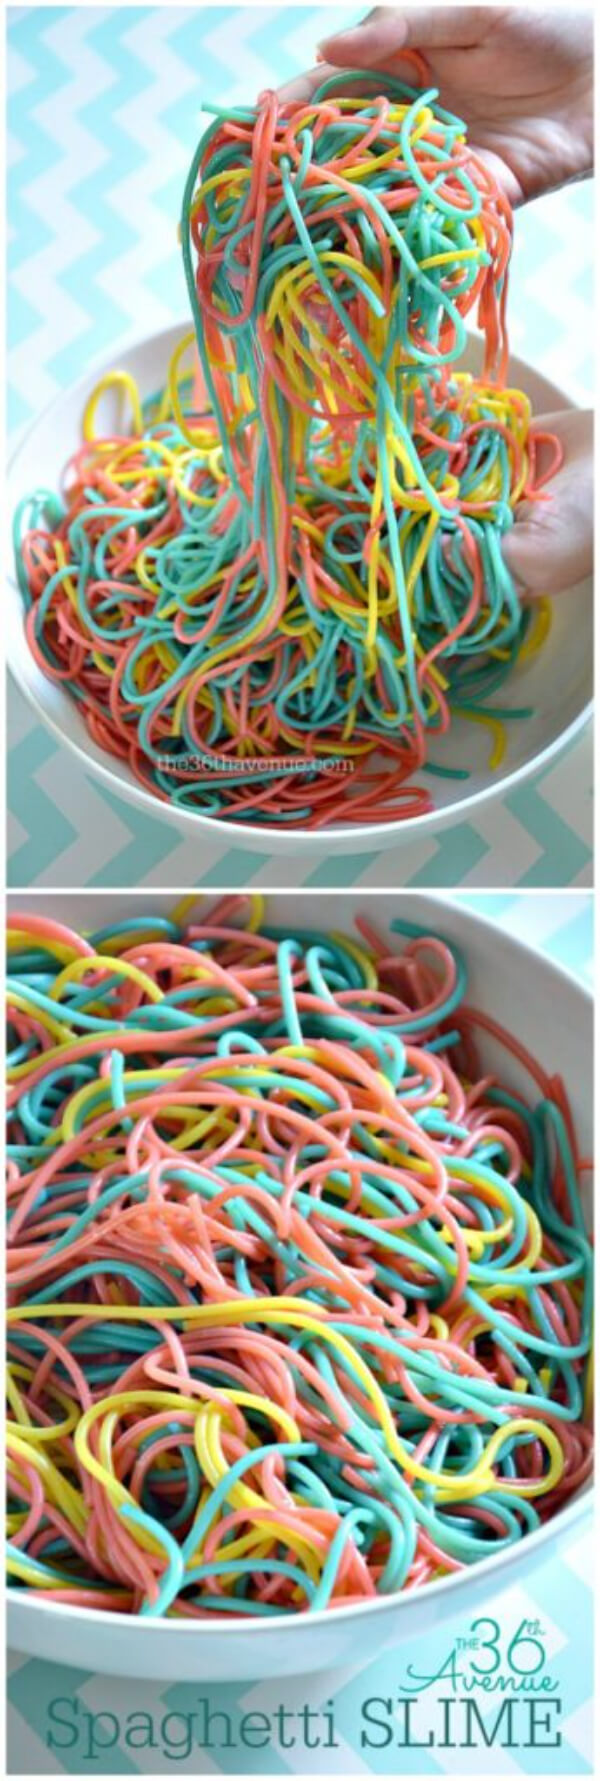 Make A Quick And Easy Spaghetti Slime